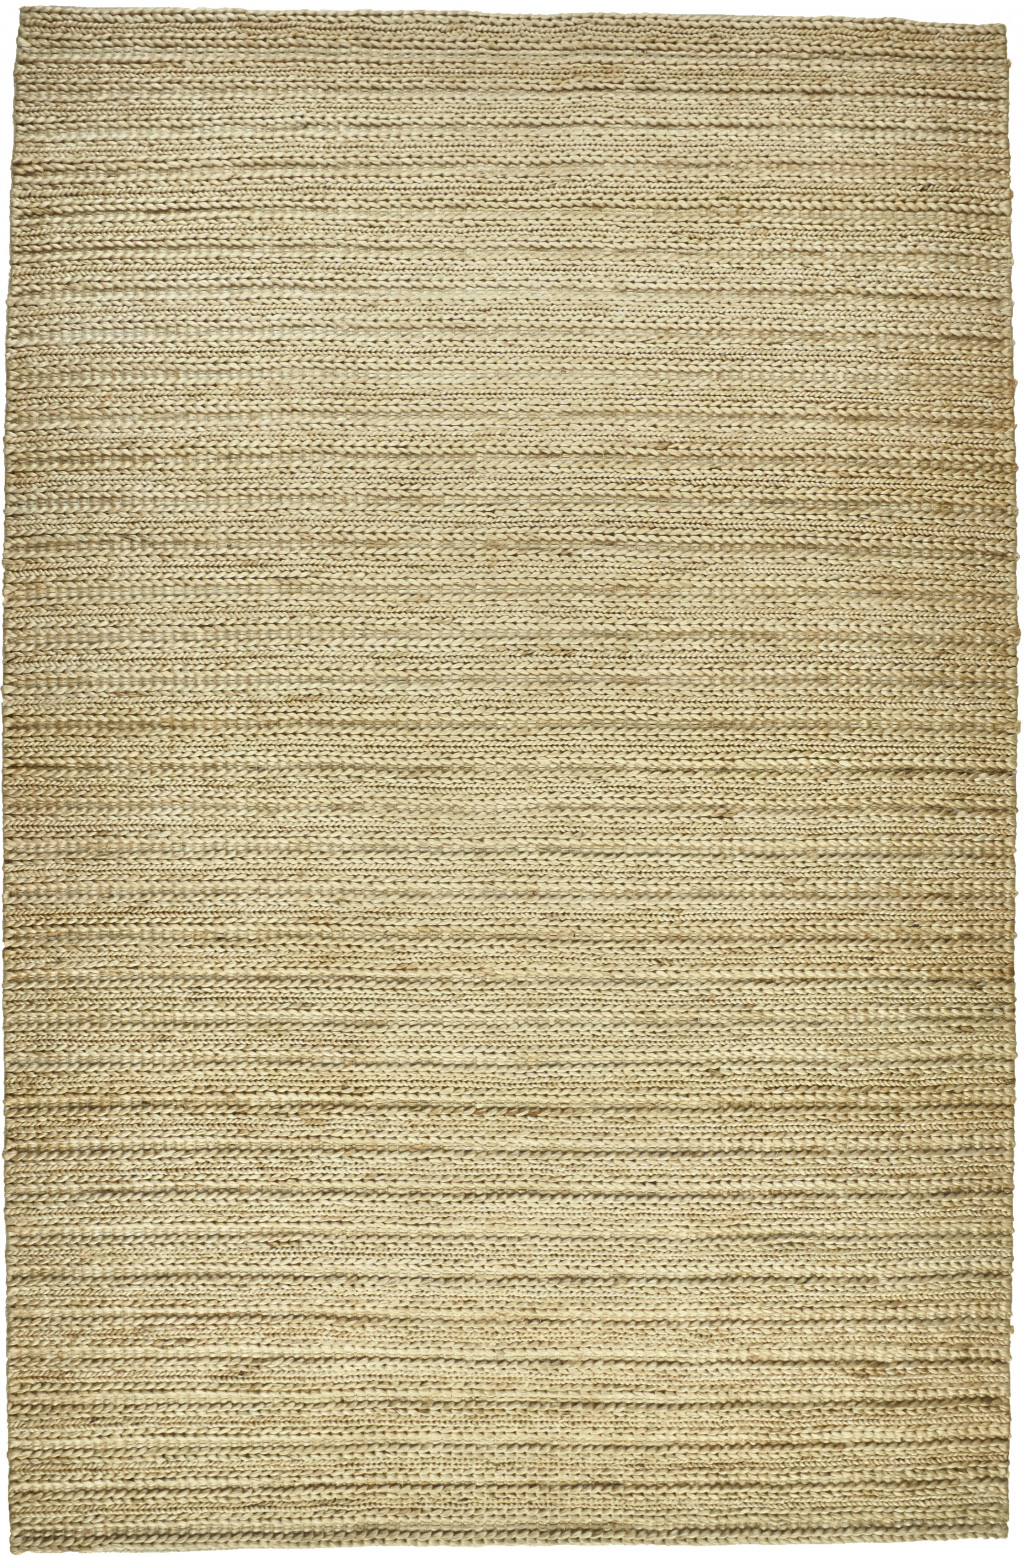 5' X 8' Tan Ivory And Taupe Hand Woven Area Rug-511421-1